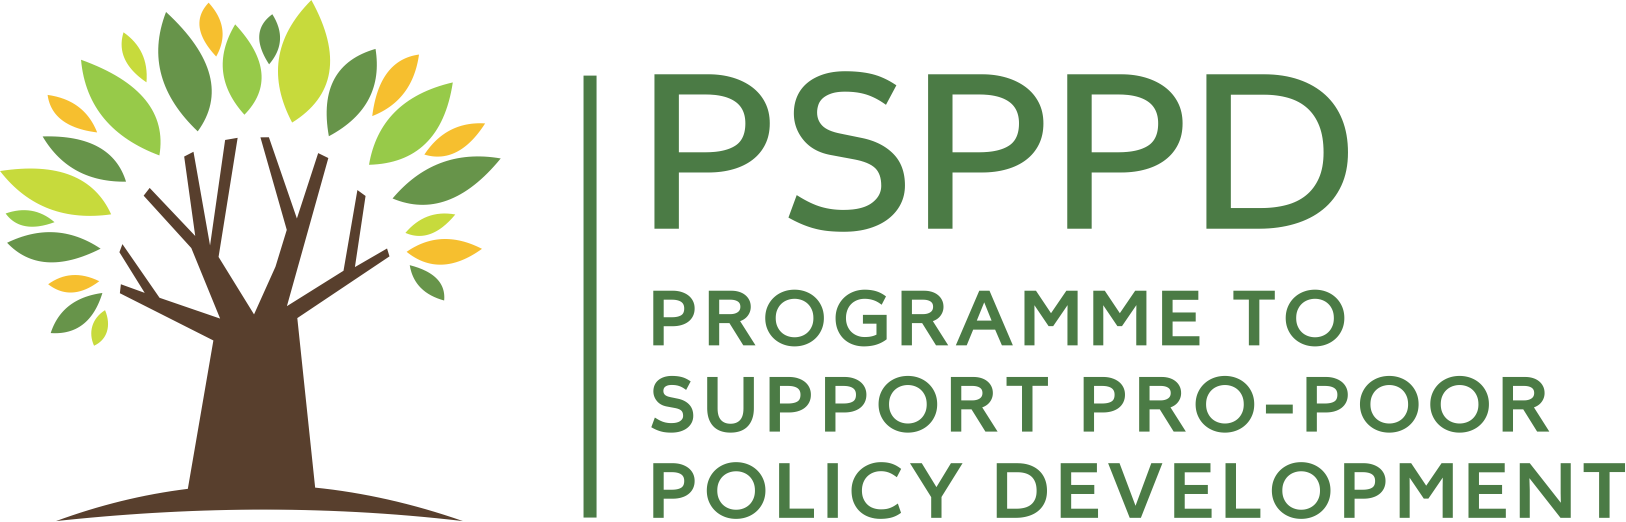 Programme to support pro-poor policy development